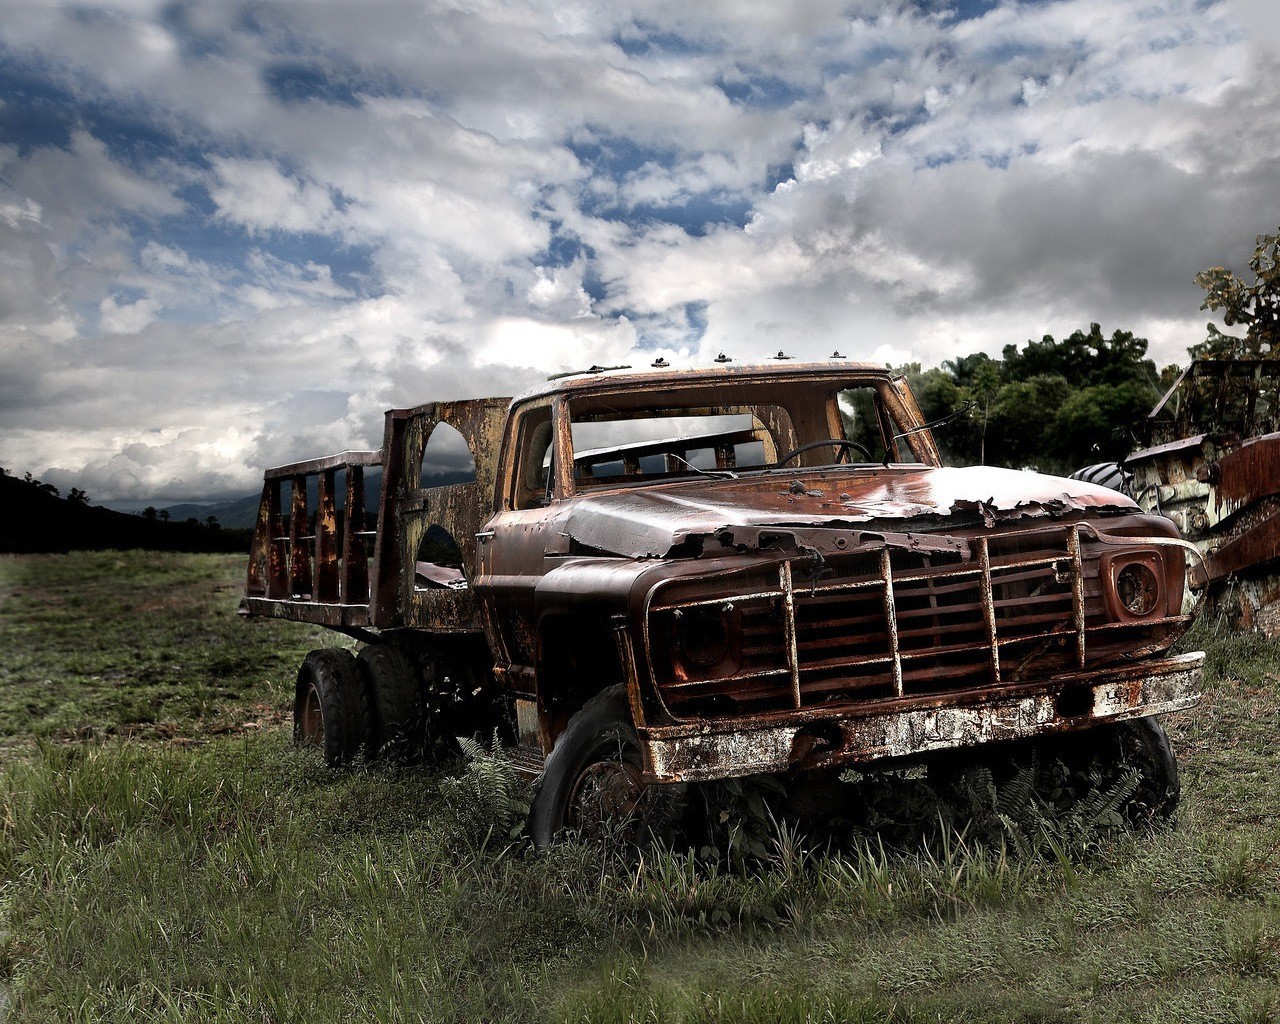 Old Truck Wallpapers for Computer 5414 - HD Wallpapers Site